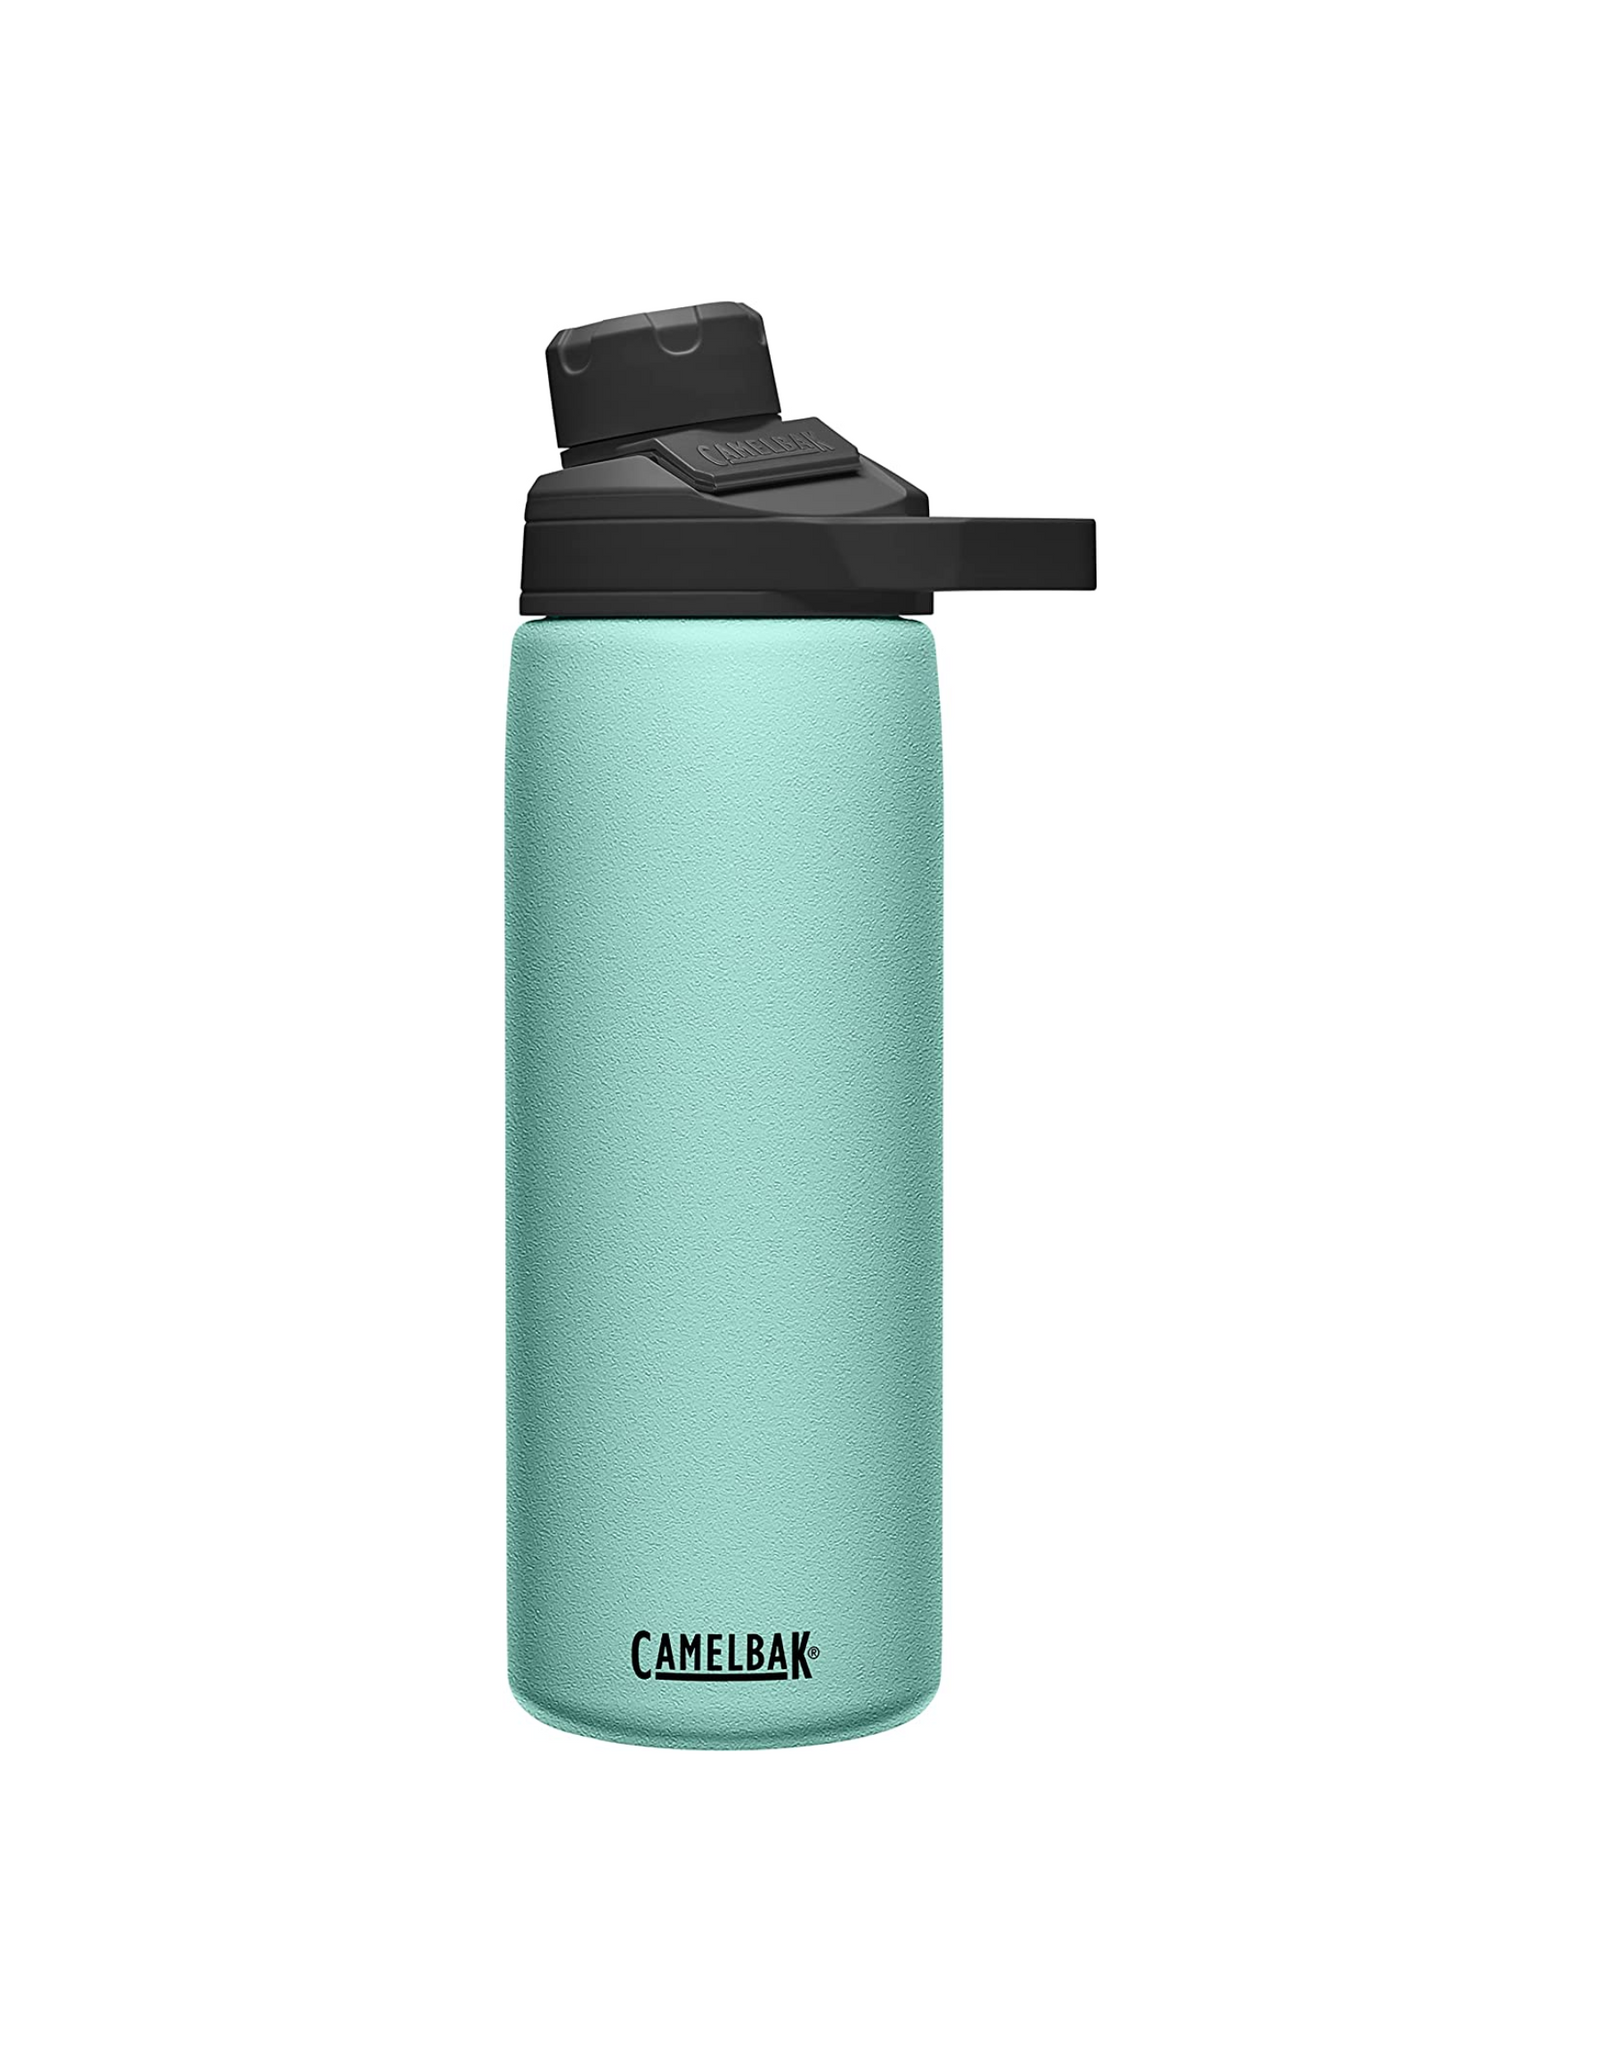 CamelBak Chute Mag Water Bottle, Insulated Stainless Steel, 20 oz, Coastal